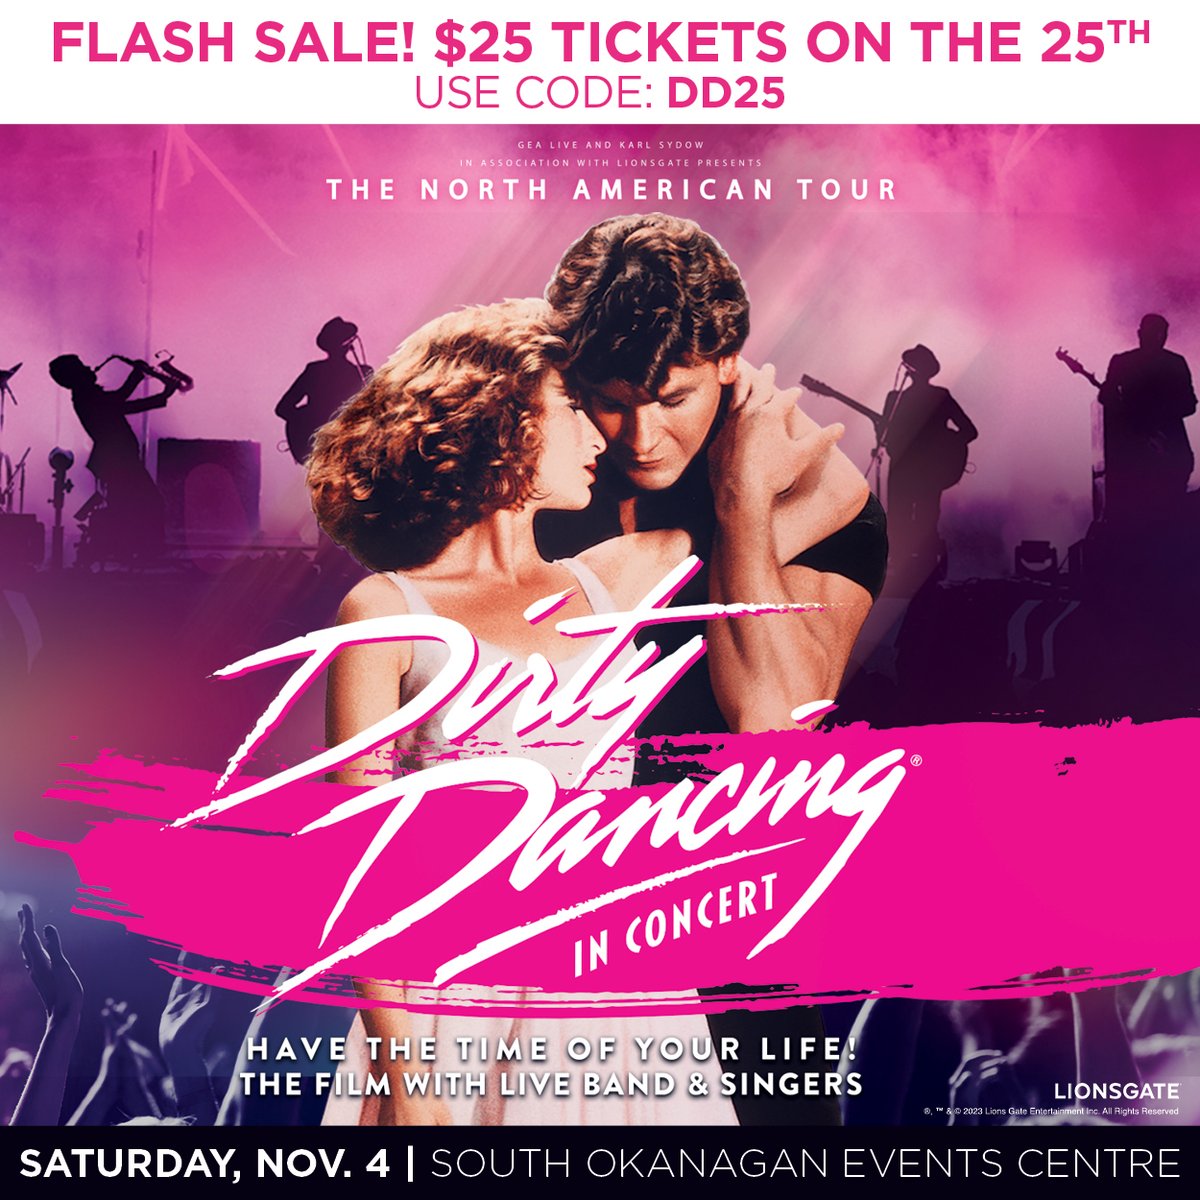 THIS JUST IN 💥 $25 TICKETS ON THE 25TH TODAY ONLY use code 'DD25' before 11:59PM tonight to secure your Dirty Dancing: In Concert tickets for only $25! 💃 Enter the promo code here 🎫 bit.ly/EventPromoCode